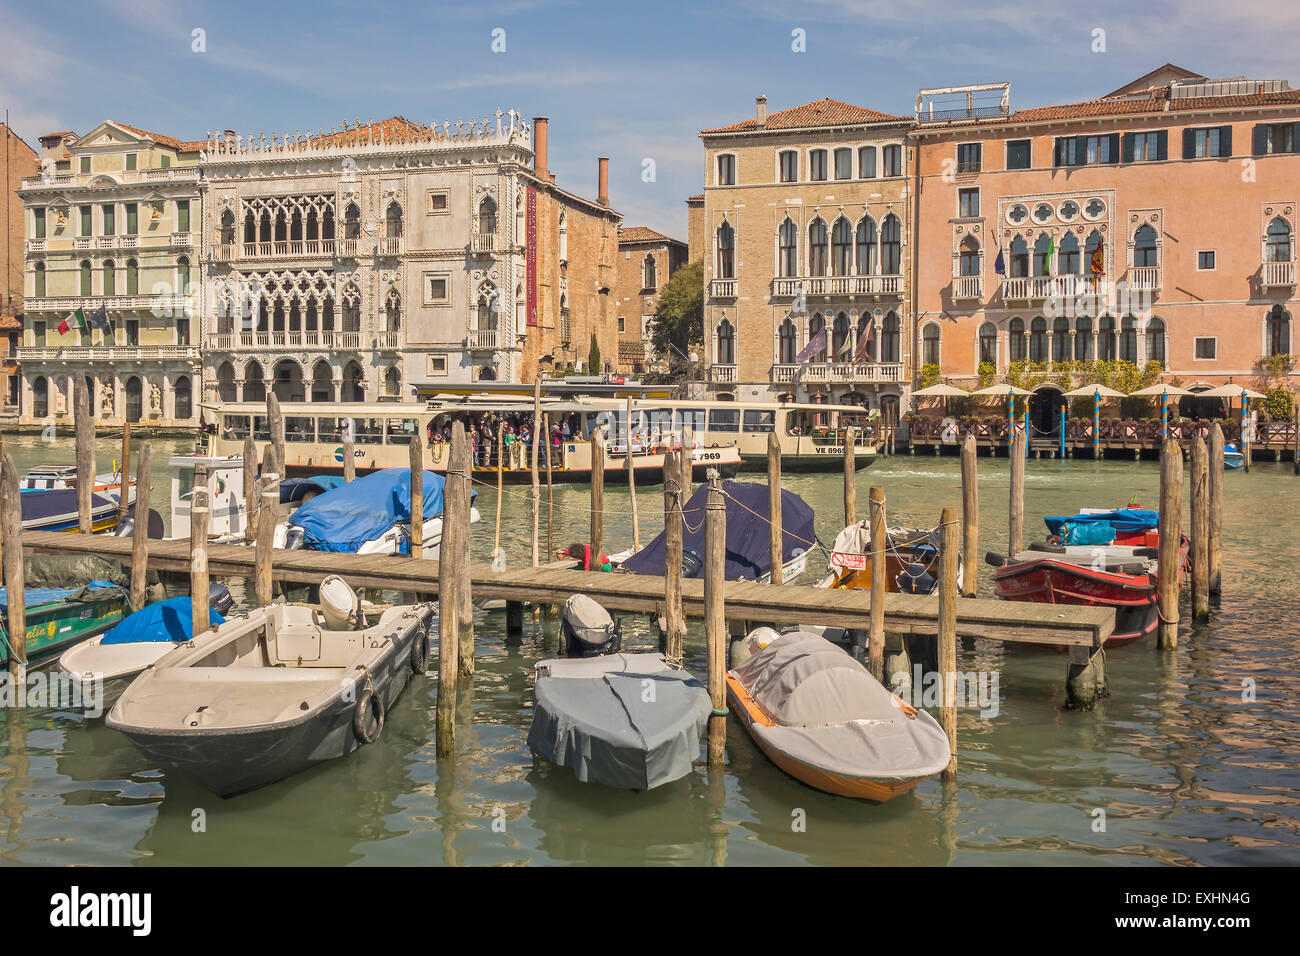 Boats Moored On The Grand Canal Venice Italy Stock Photo